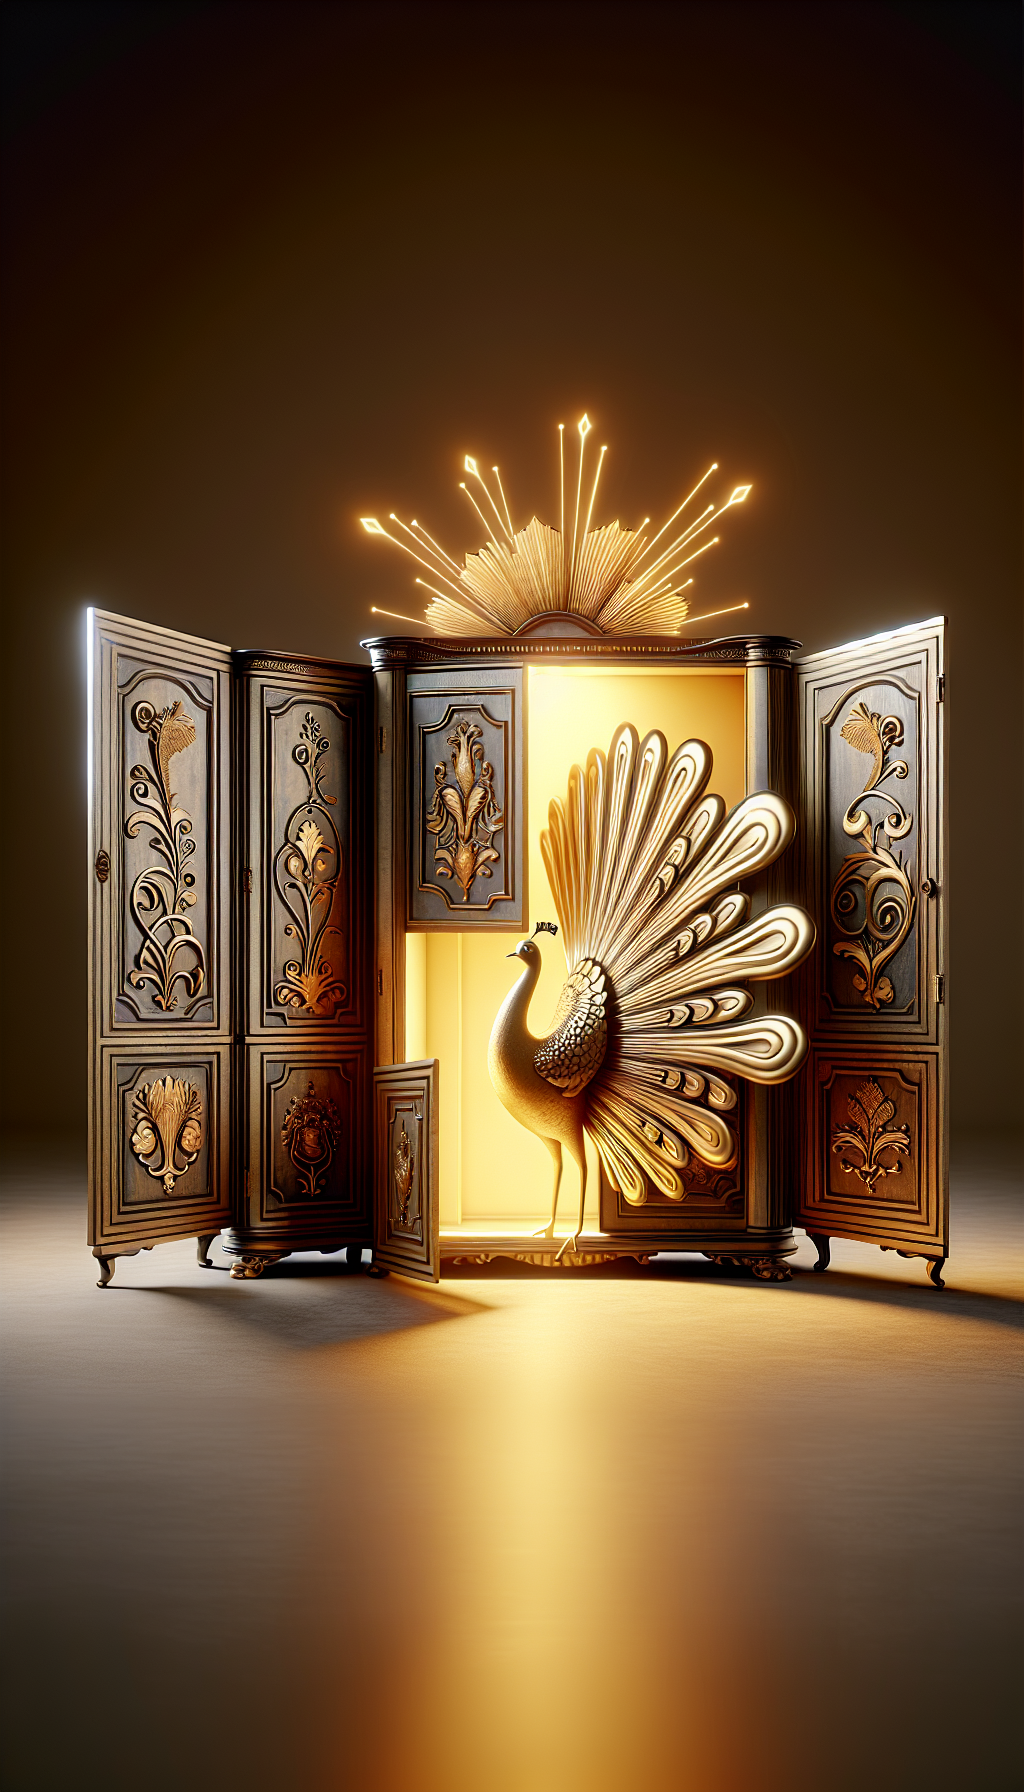 An elegant, half-open antique armoire emerges as the focal point, with one section rendered in detailed Baroque filigree, another in smooth Art Nouveau curves, and a third in sturdy Mission-style simplicity. A golden halo softly glows around it, symbolizing its rarity and value, while a regal peacock with a plume of diverse styles perches atop, embodying its standout beauty.